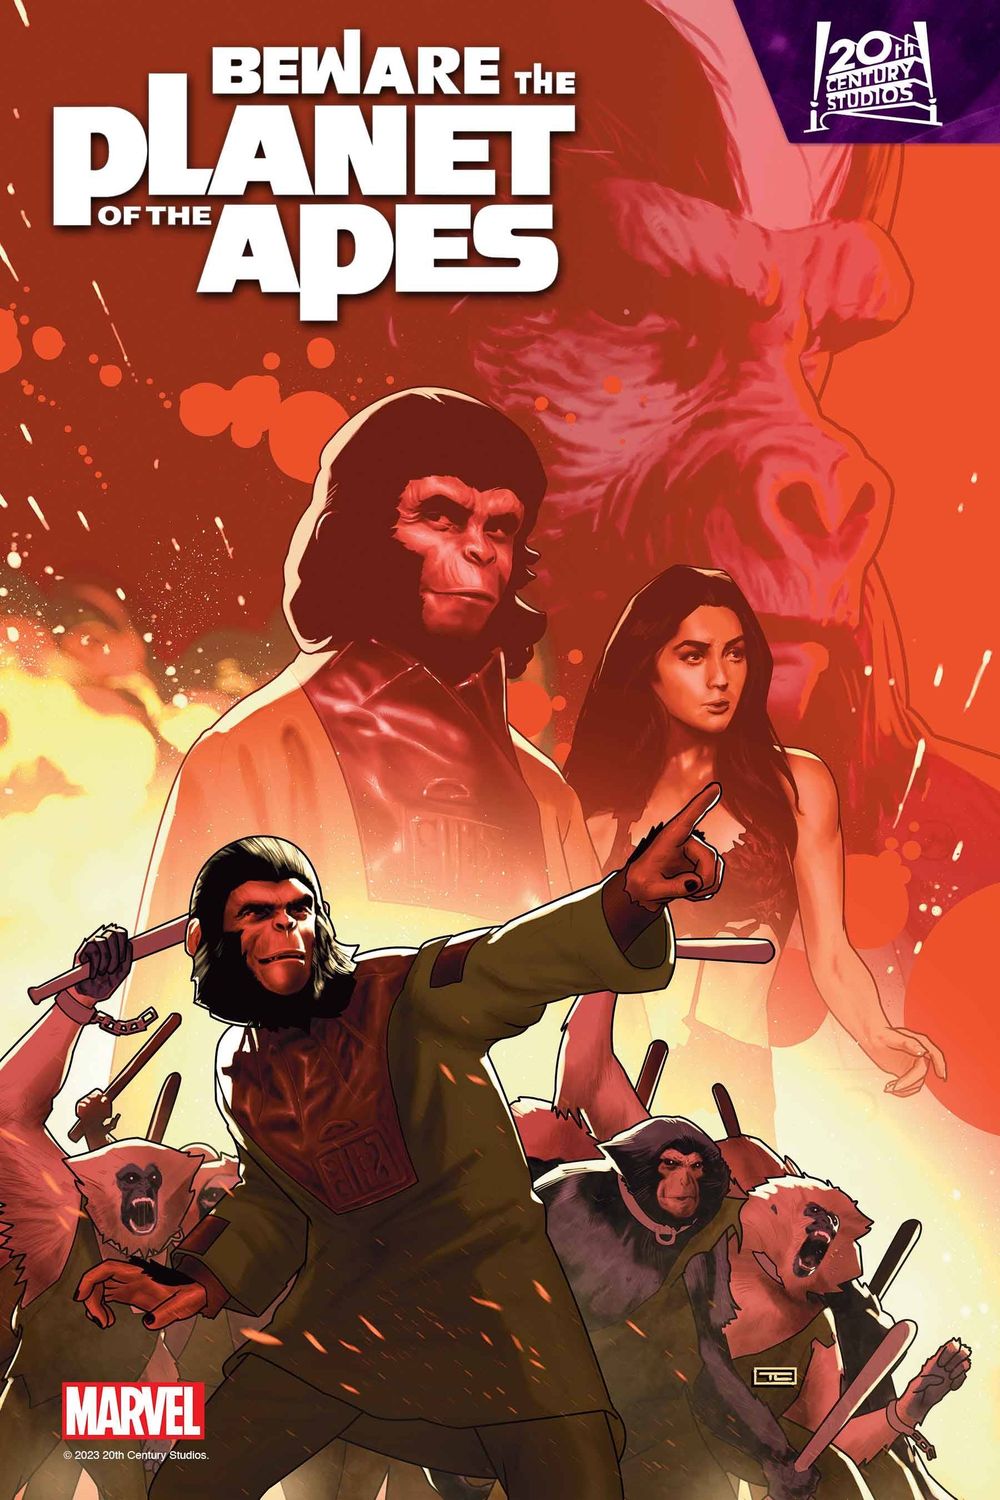 BEWARE THE PLANET OF THE APES #4
MARVEL COMICS
(17th April 2024)